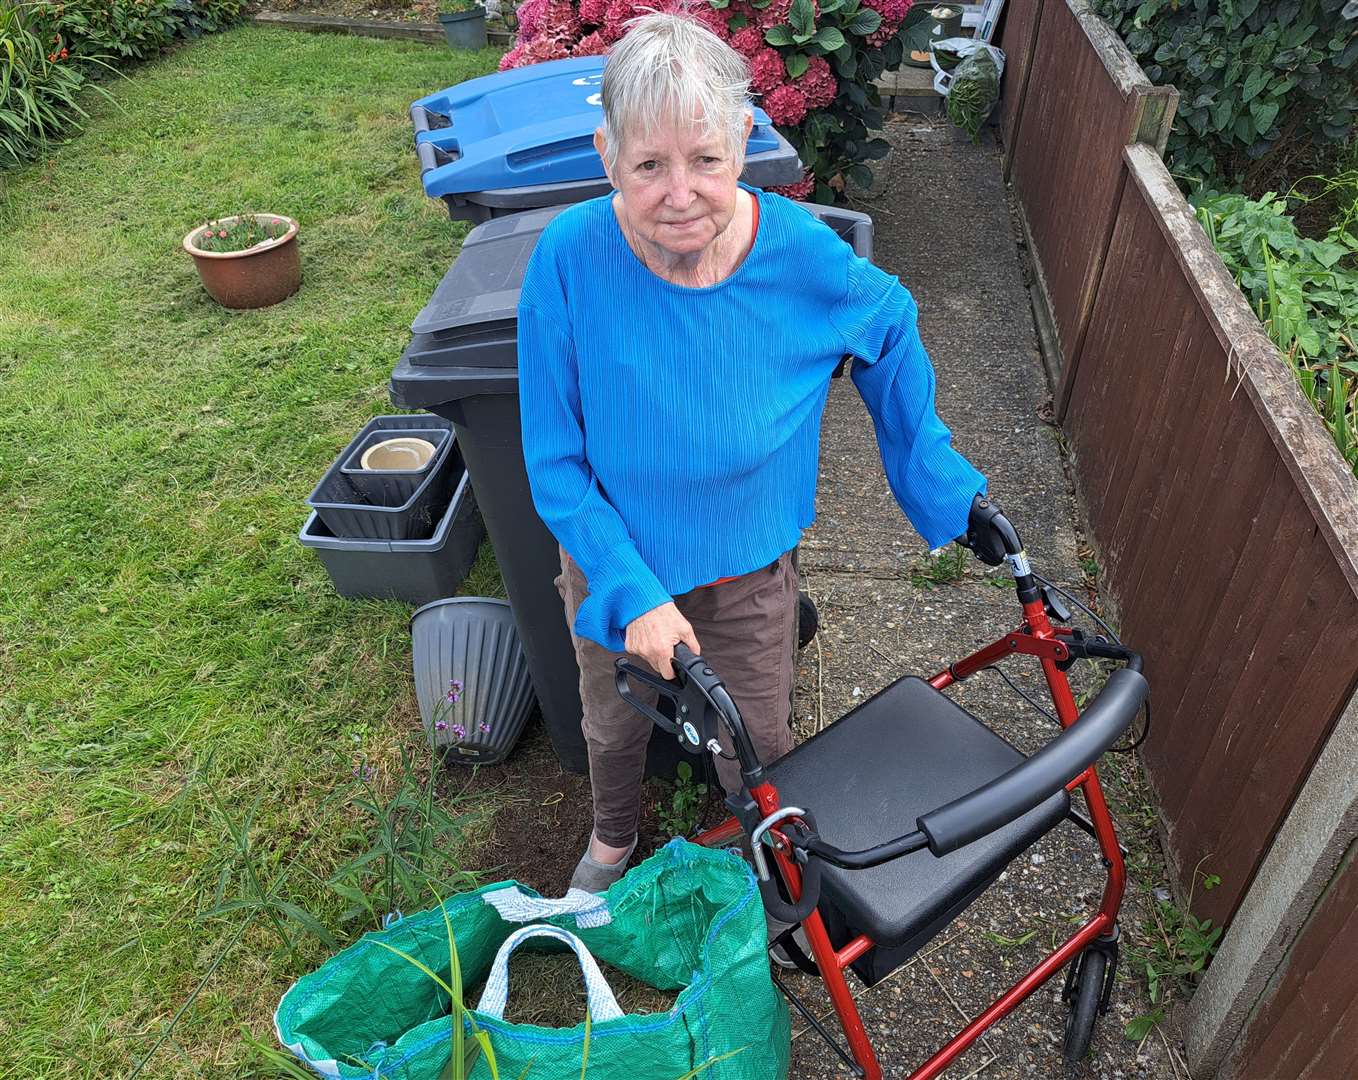 Patricia Mayberry, 78, was told to remove the dumped bag herself